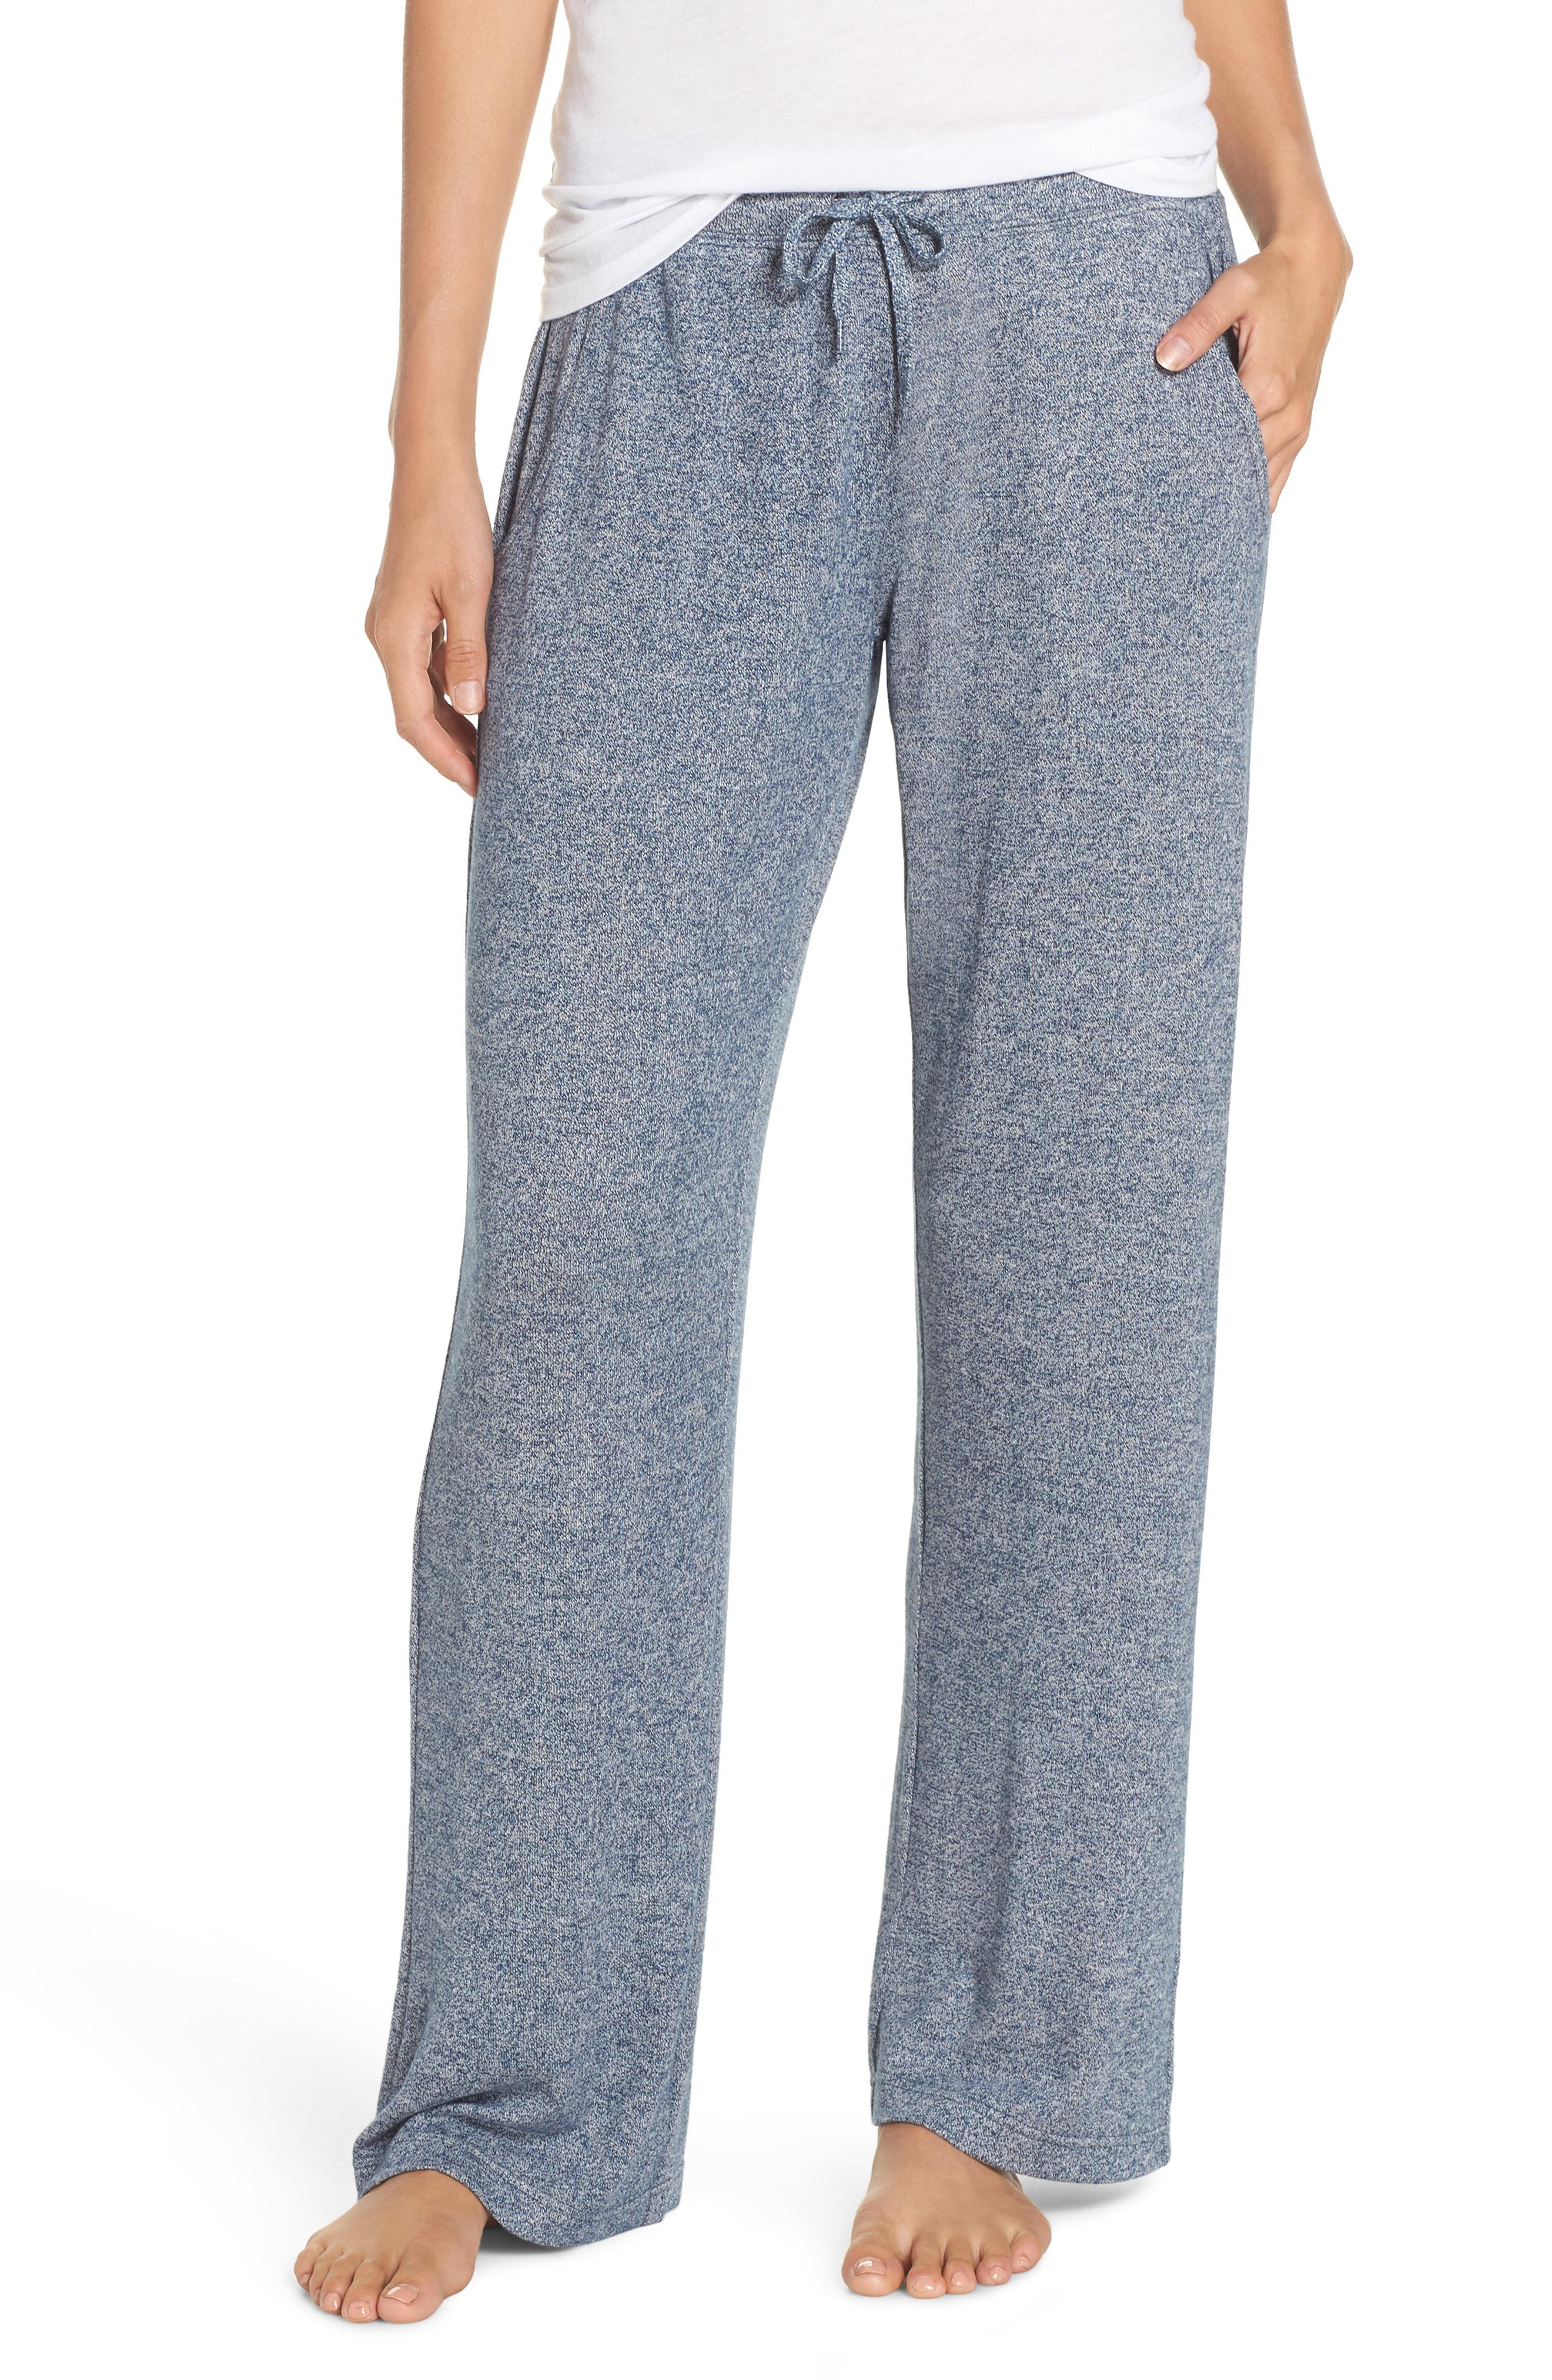 Charlie Sheen's Guide To Knit Jean Lounge Pants - Elizabeth Daily Note